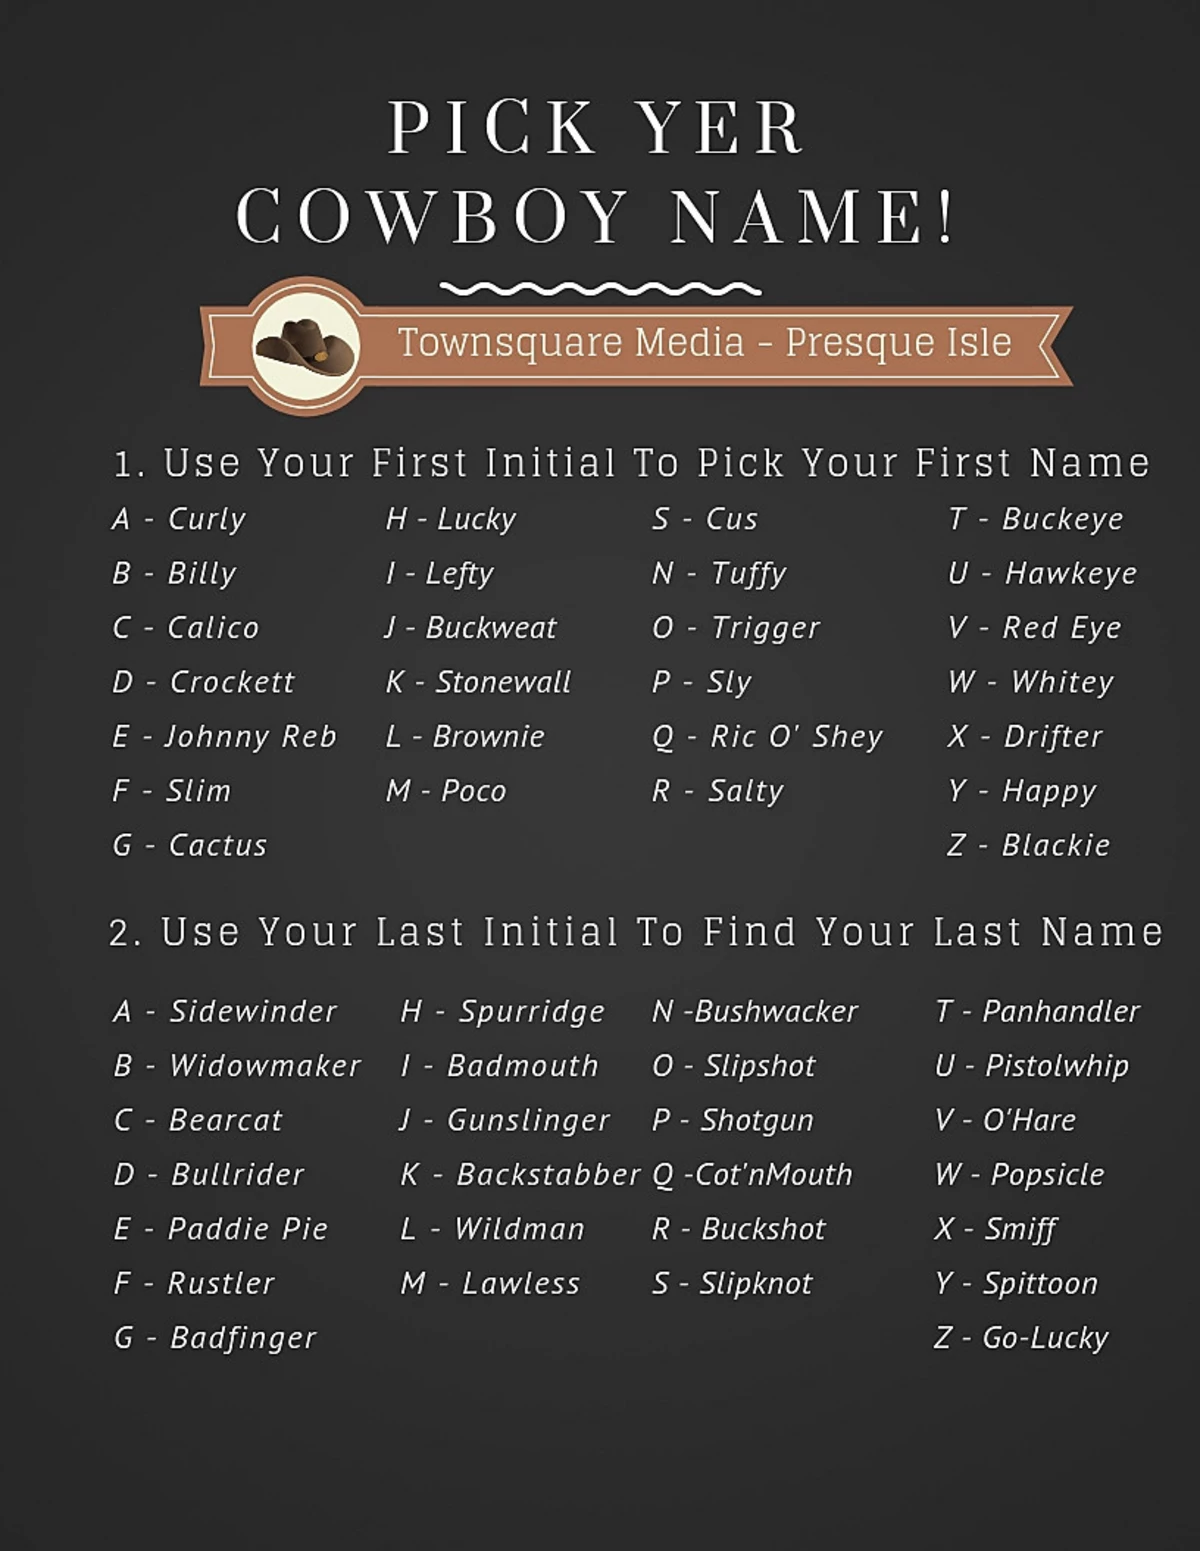 Find Your Cowboy Name Here And Post It!